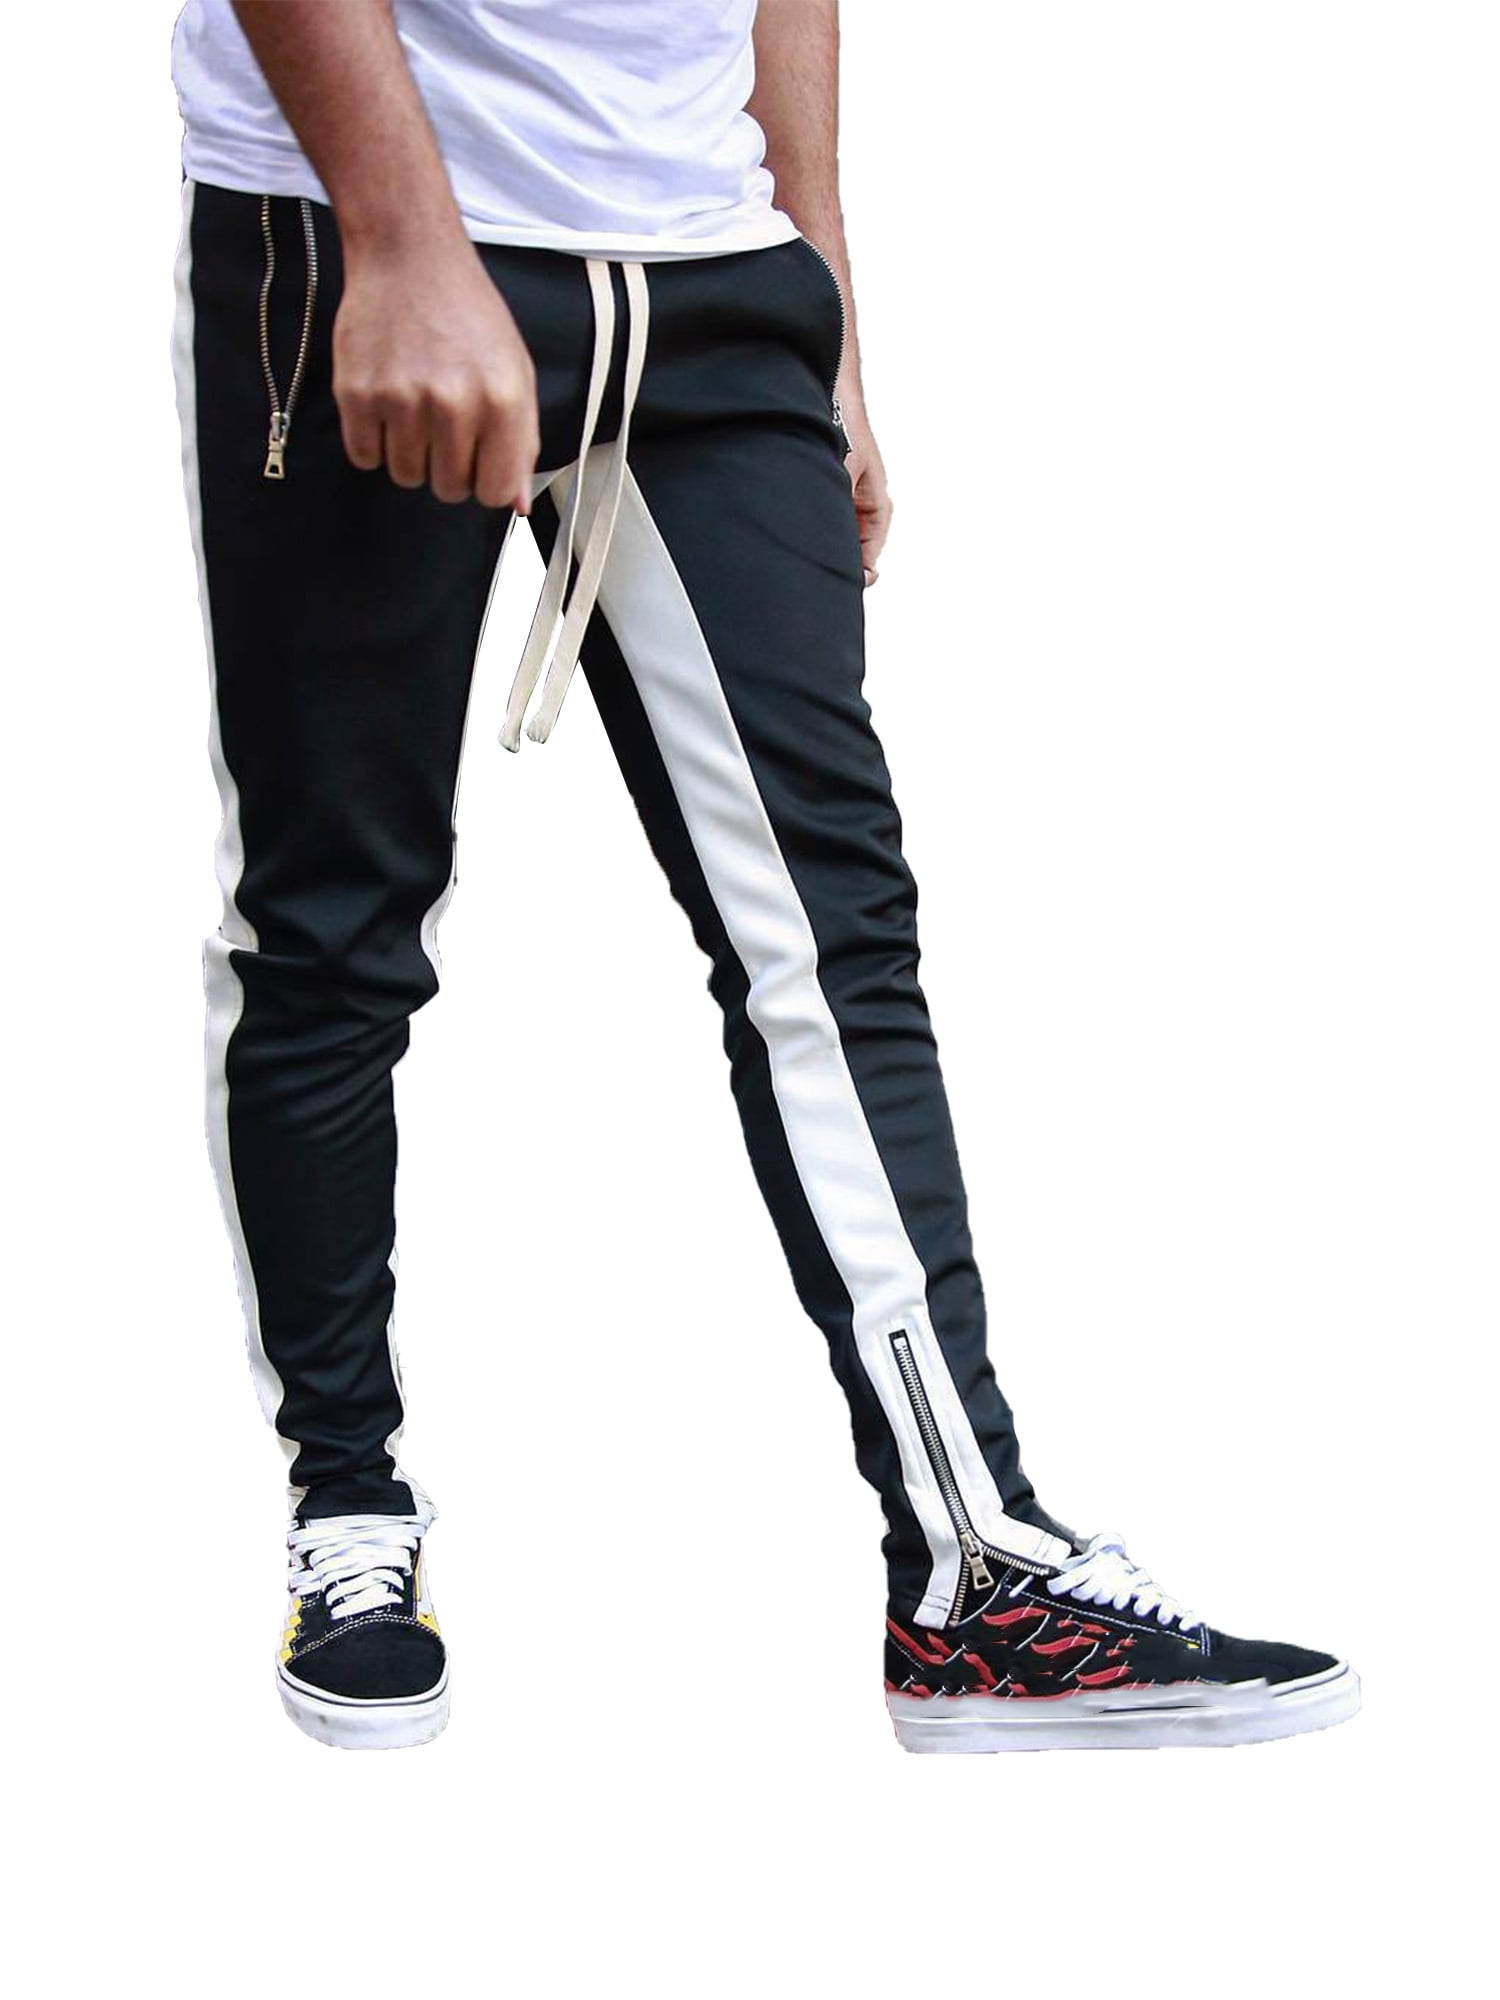 Hip Hop Track Pants for Mens Teen Boys Slim Fit Zipper Jogger Bottom with Side Taping - Walmart.com